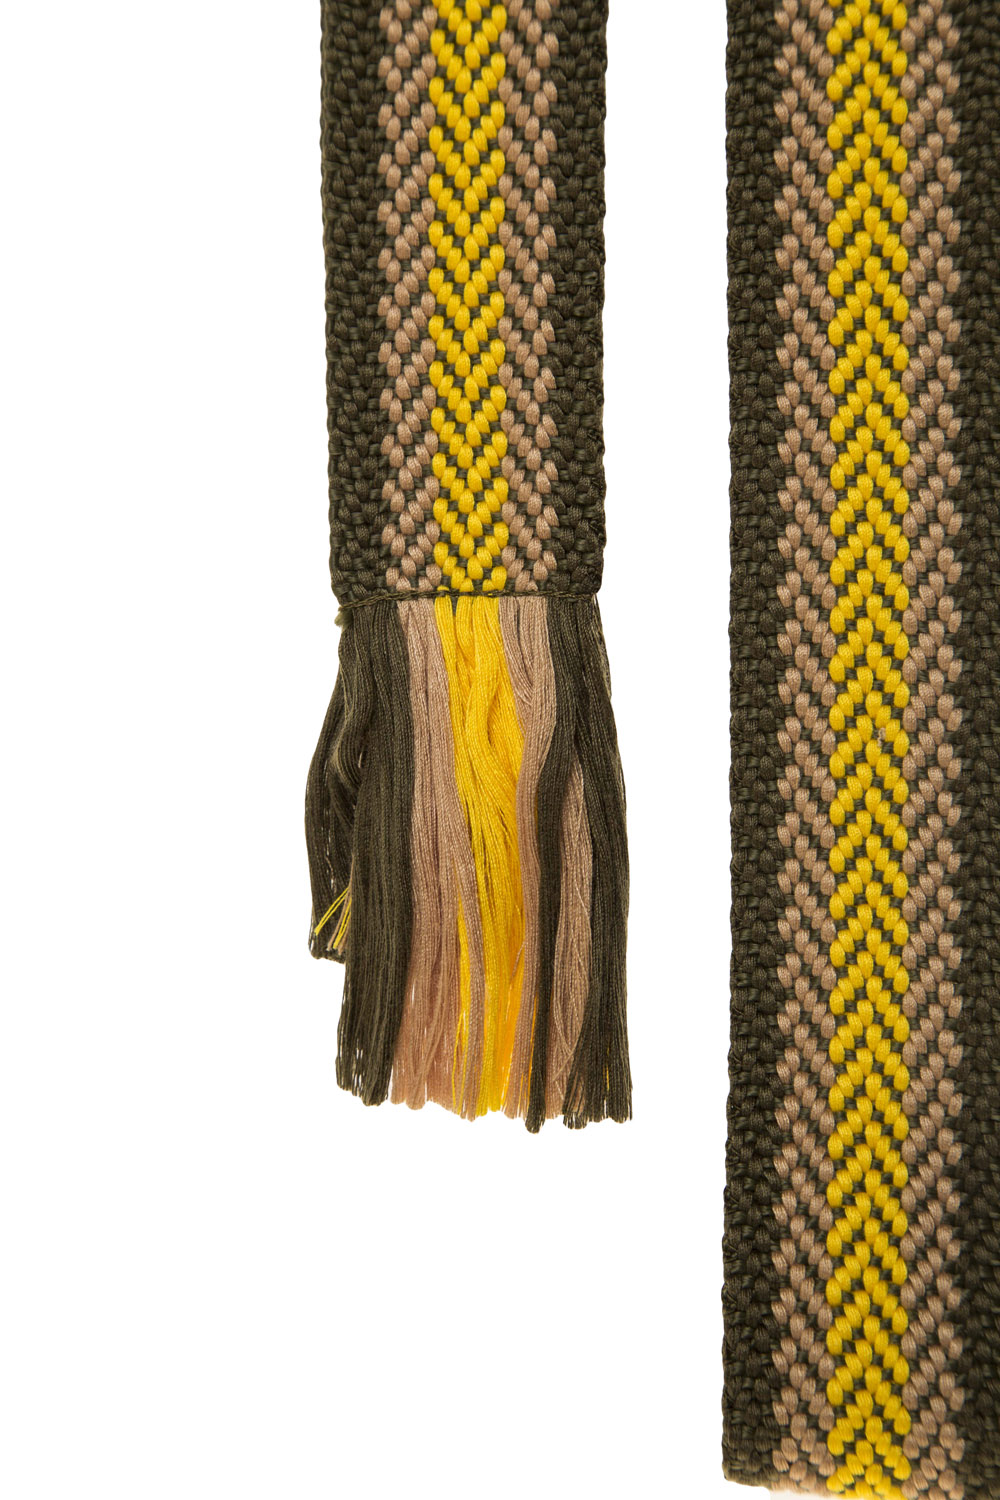 Woven Striped Belt with Fringes